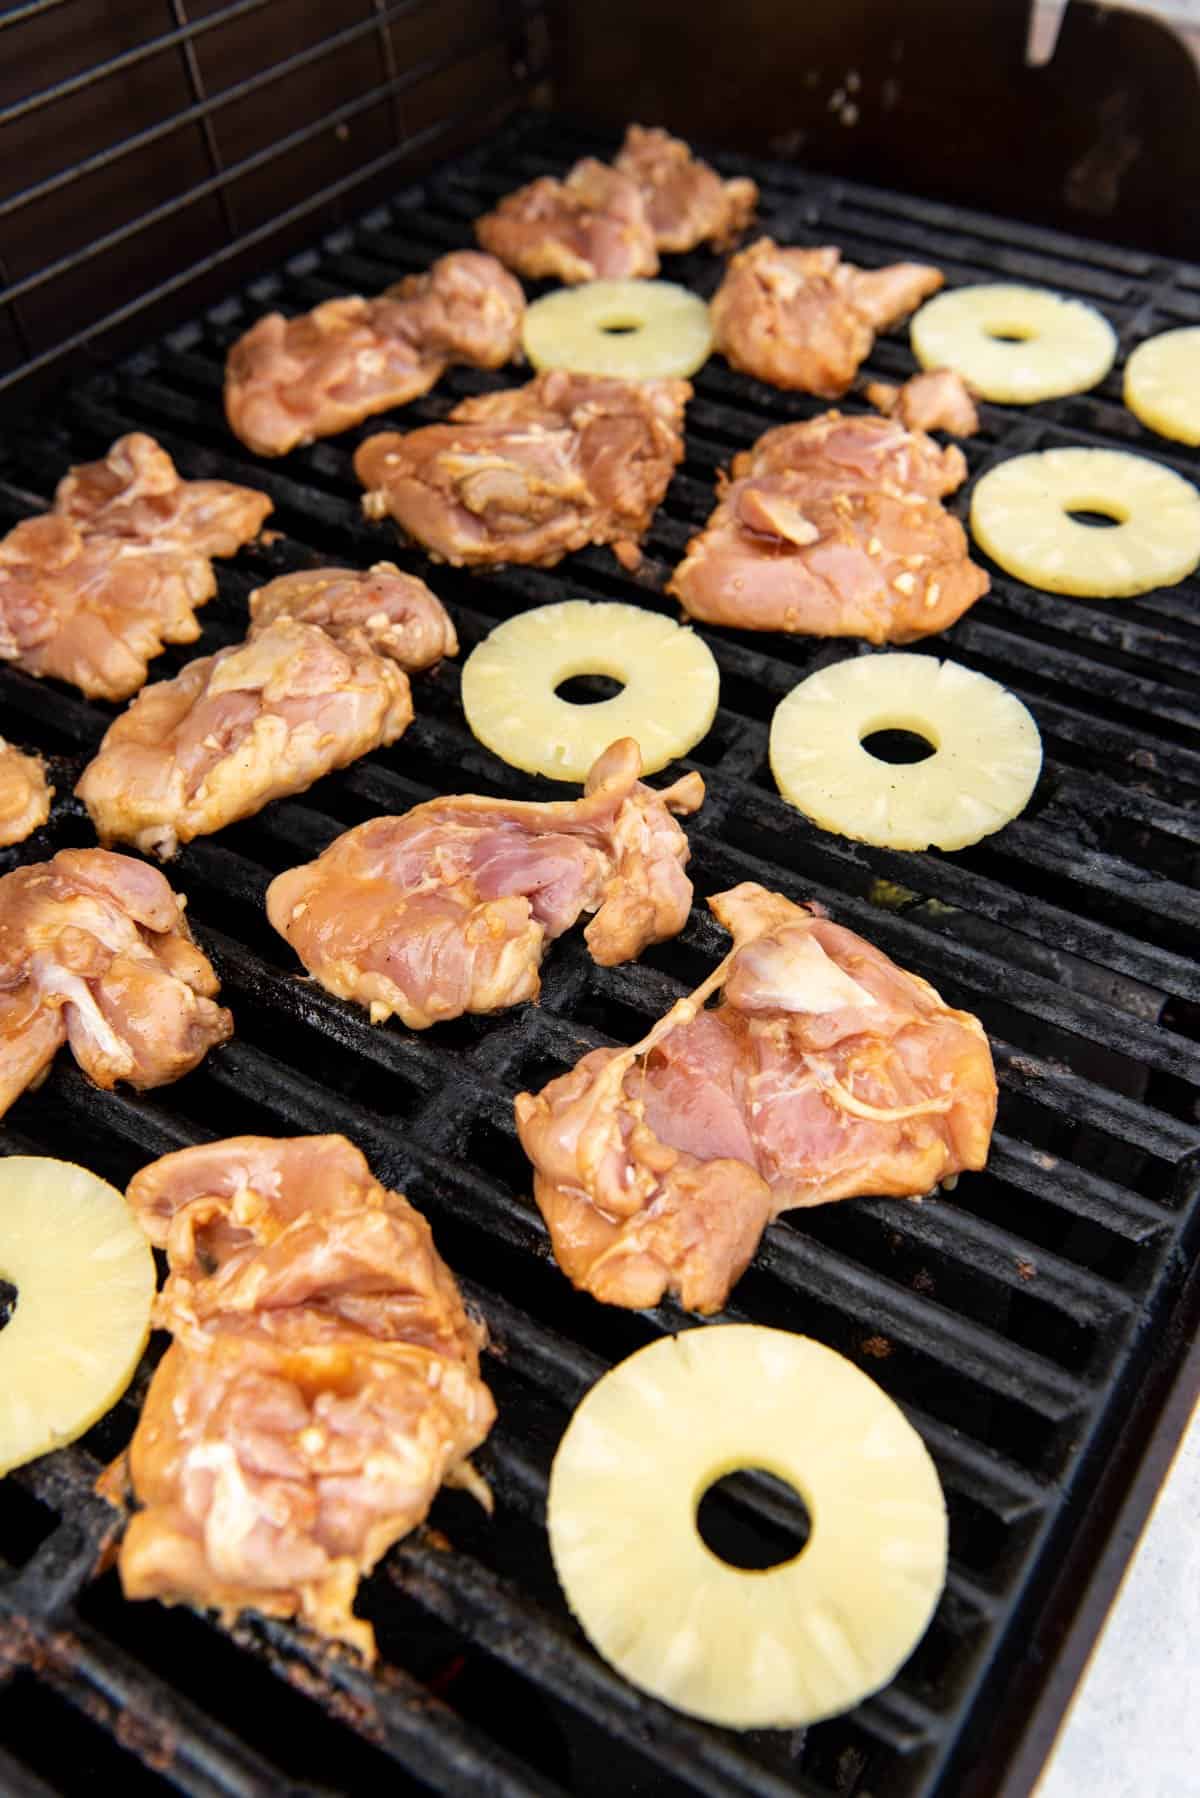 Boneless, skinless chicken thighs on the grill with pineapple rings.